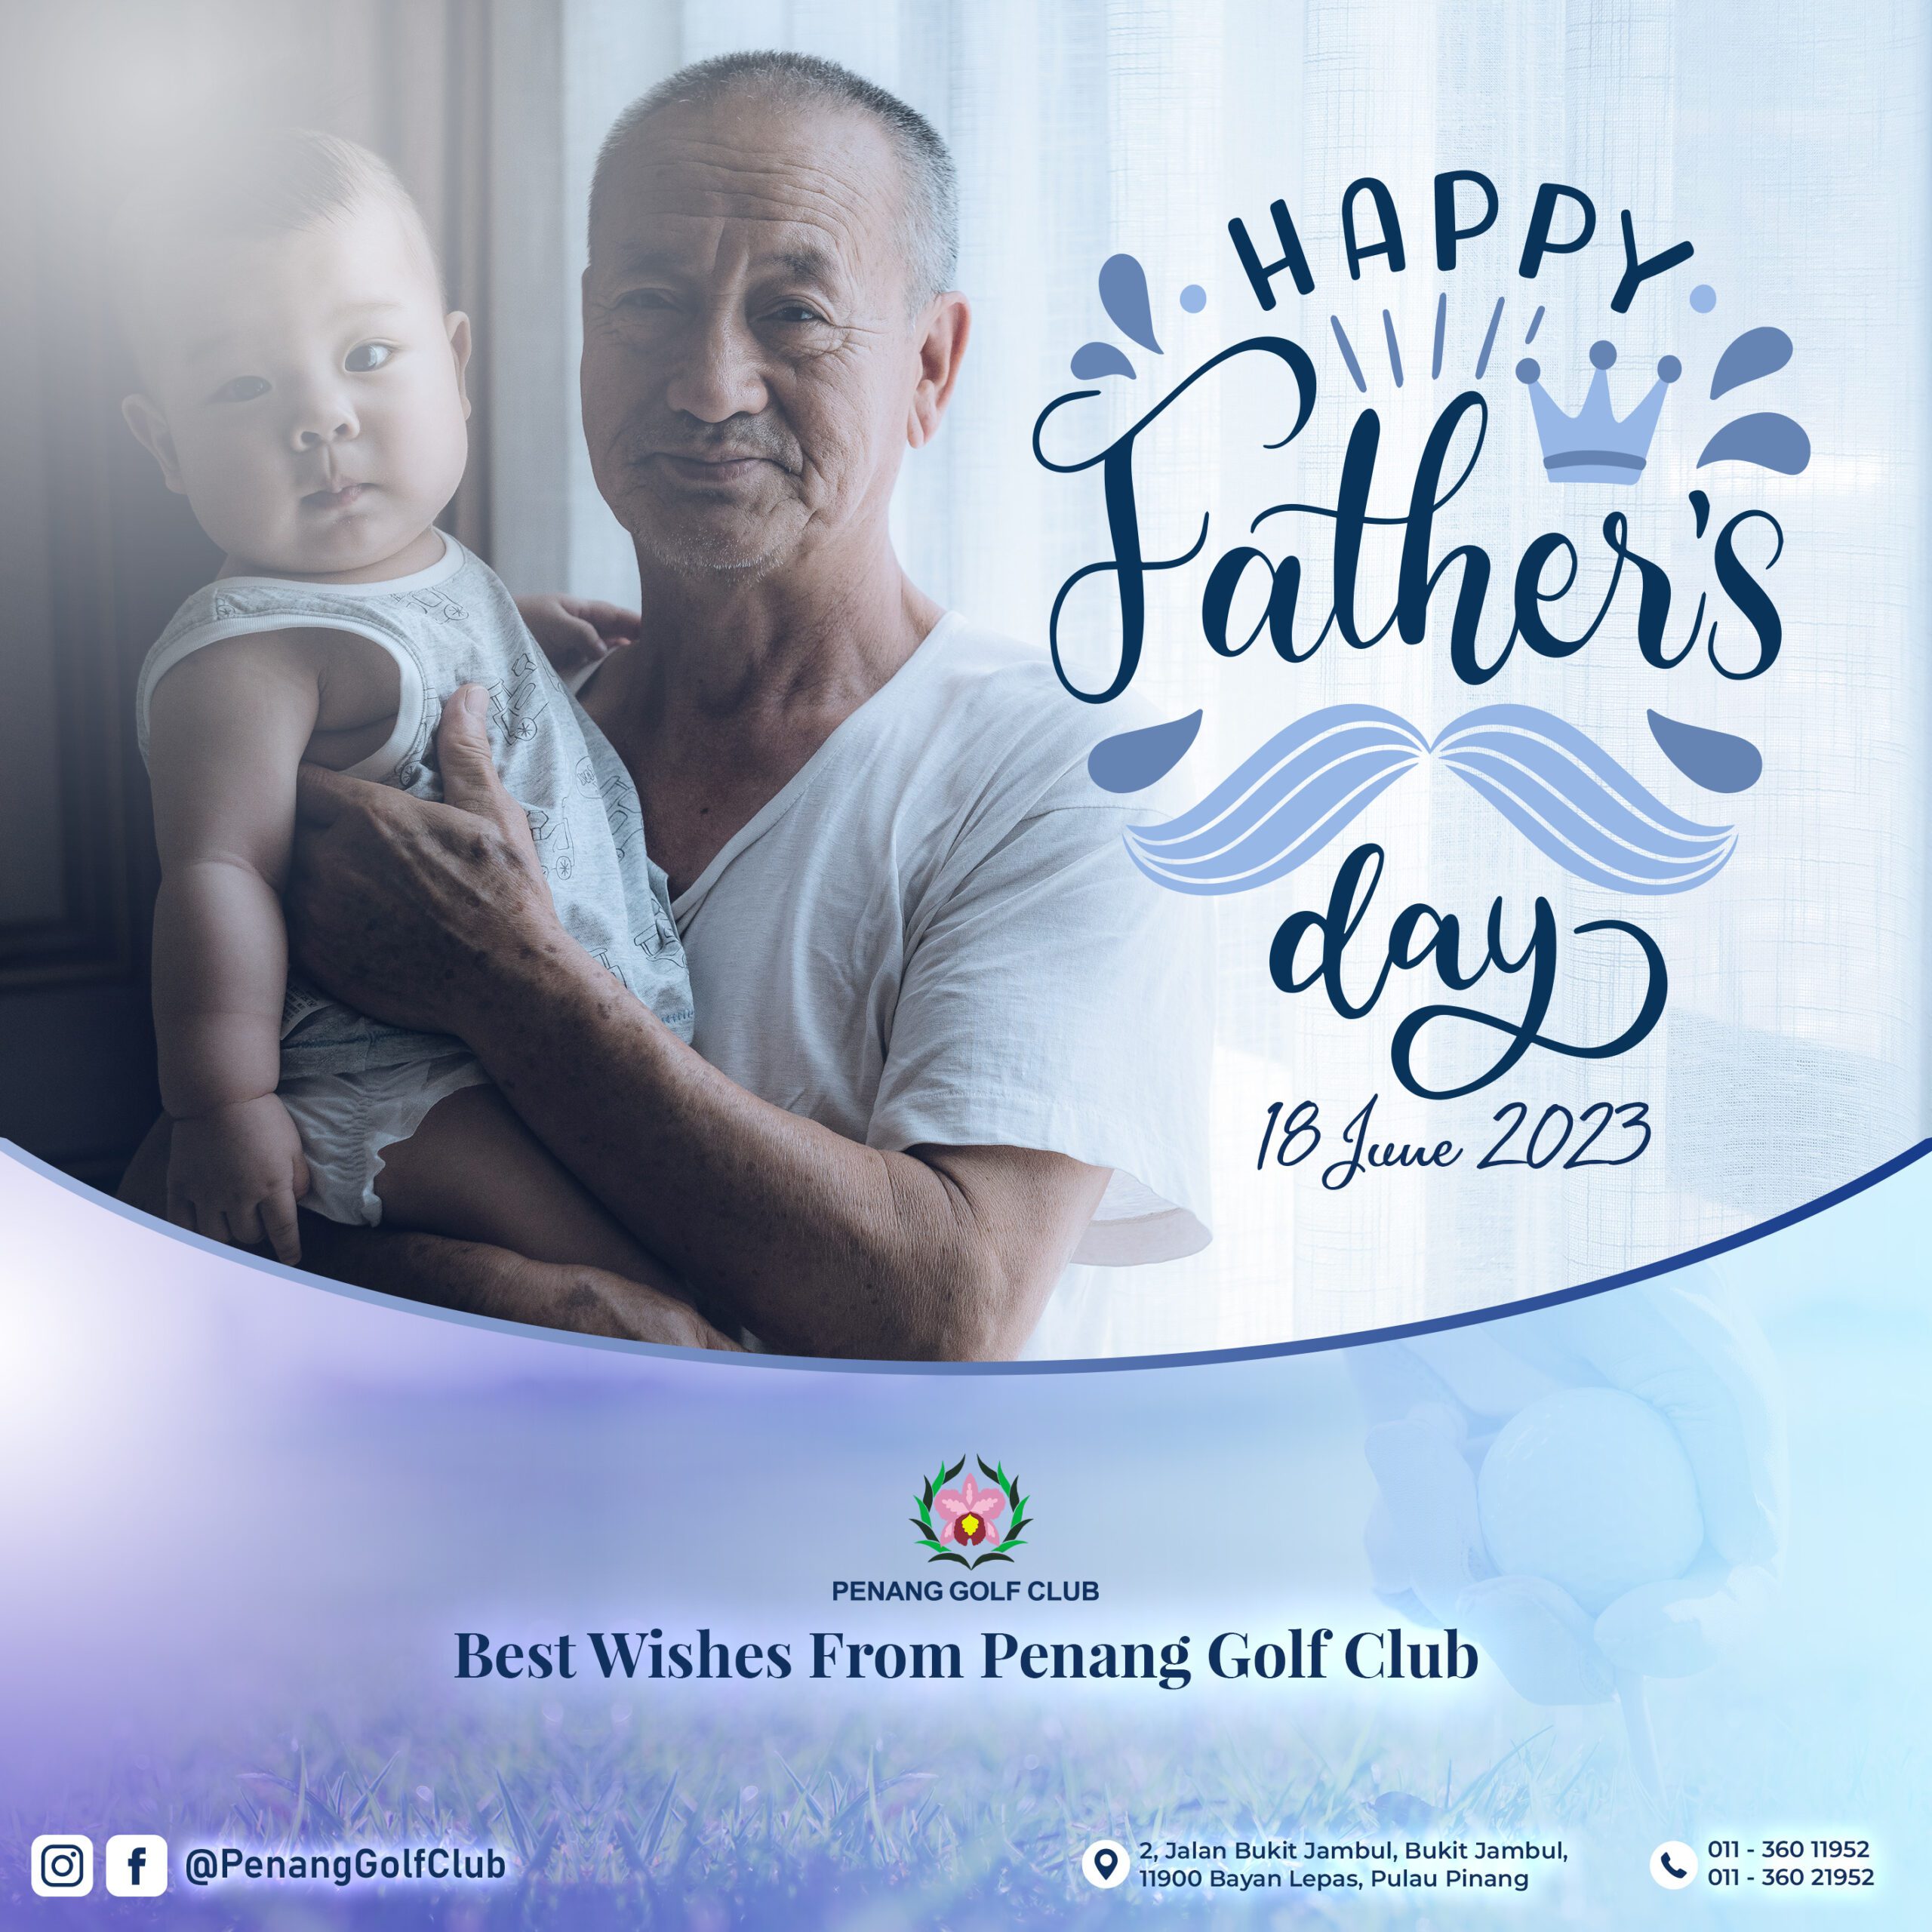 Father’s day wishes – Social Media Post v1